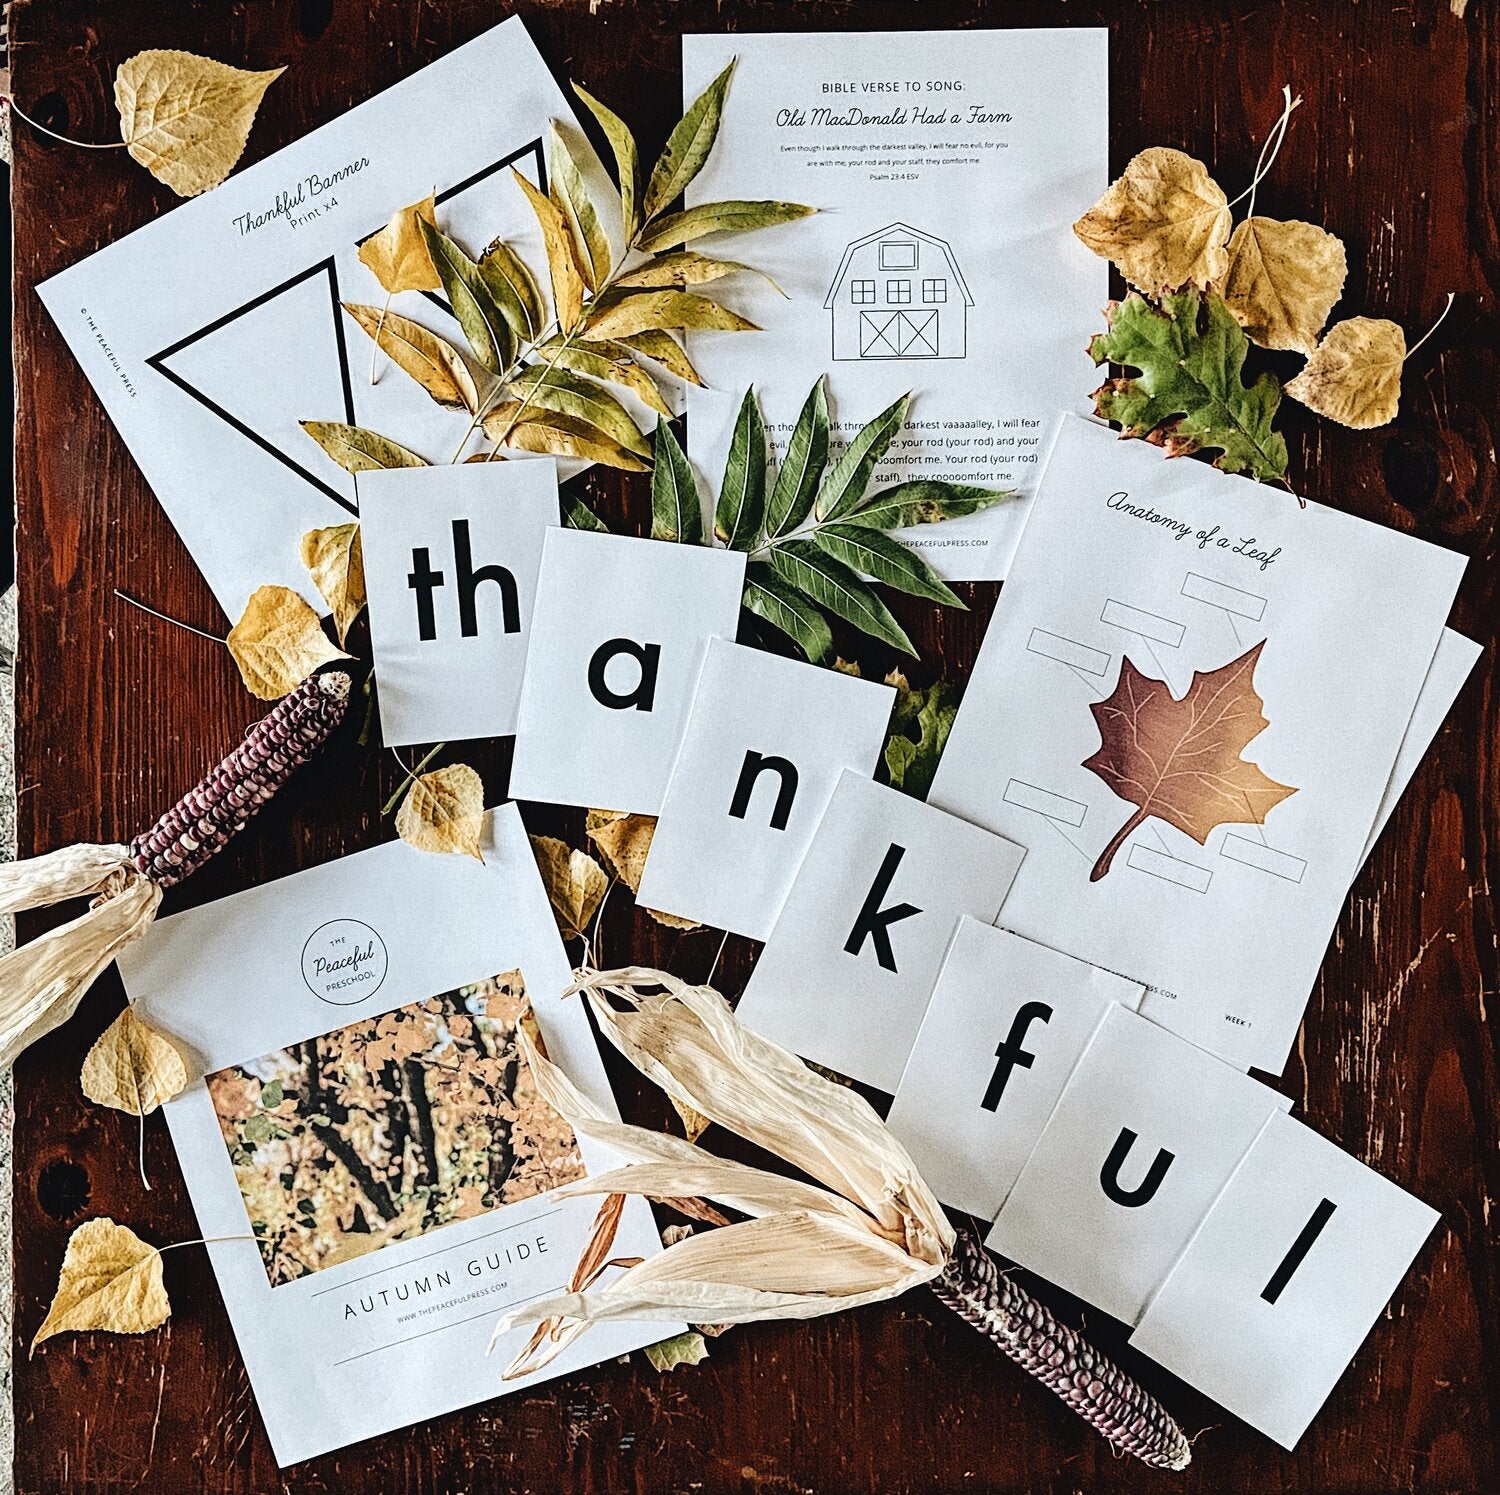 Different Homeschool Curriculum resources with leaves and dried corn with Letter Cards spelling out "thankful."